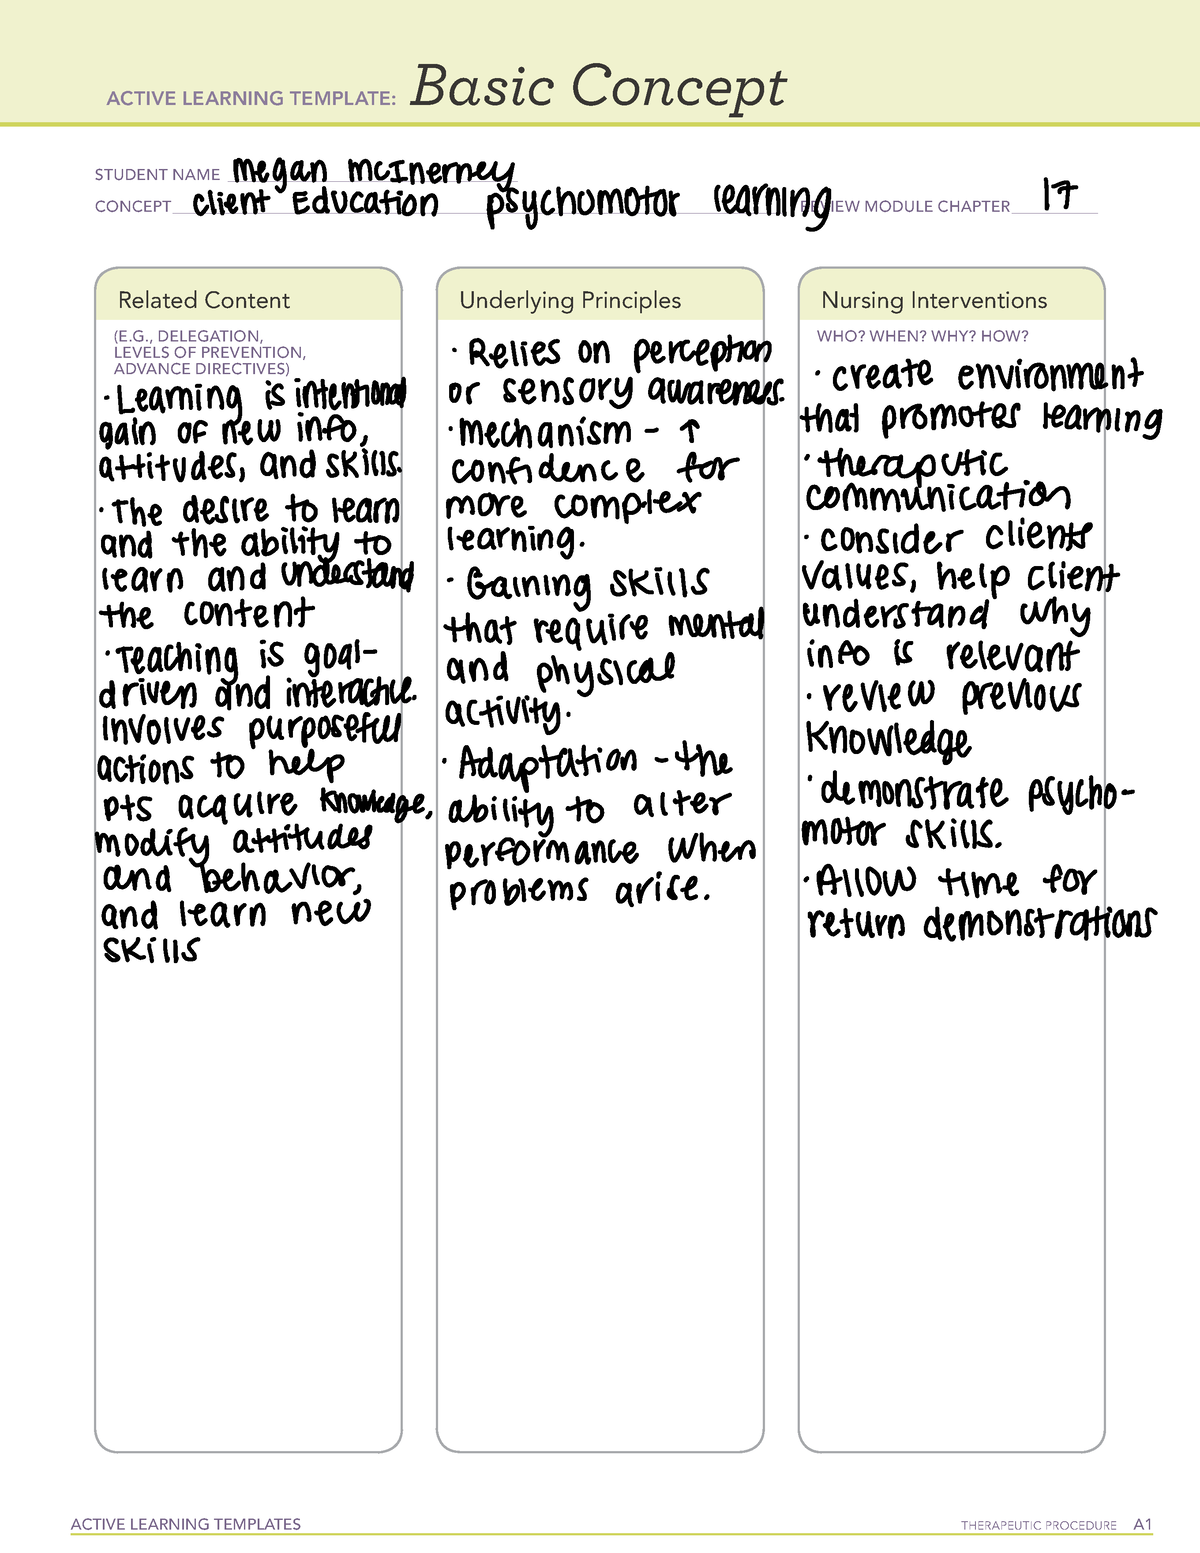 active-learning-template-basic-concept-4-active-learning-templates-vrogue